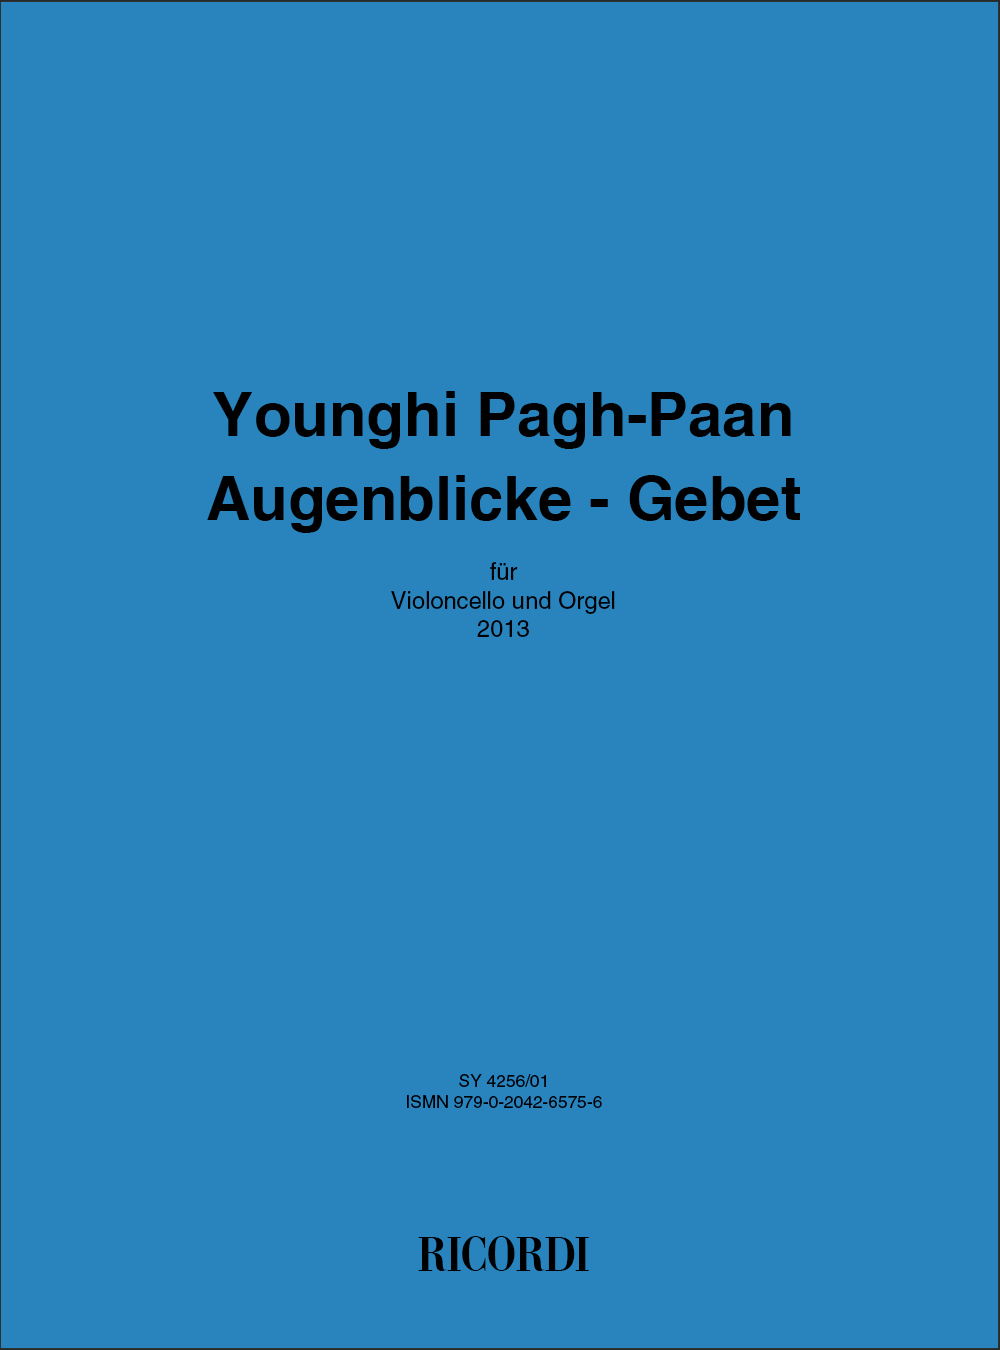 Younghi Pagh-Paan: Augenblicke - Gebet: Cello: Instrumental Work